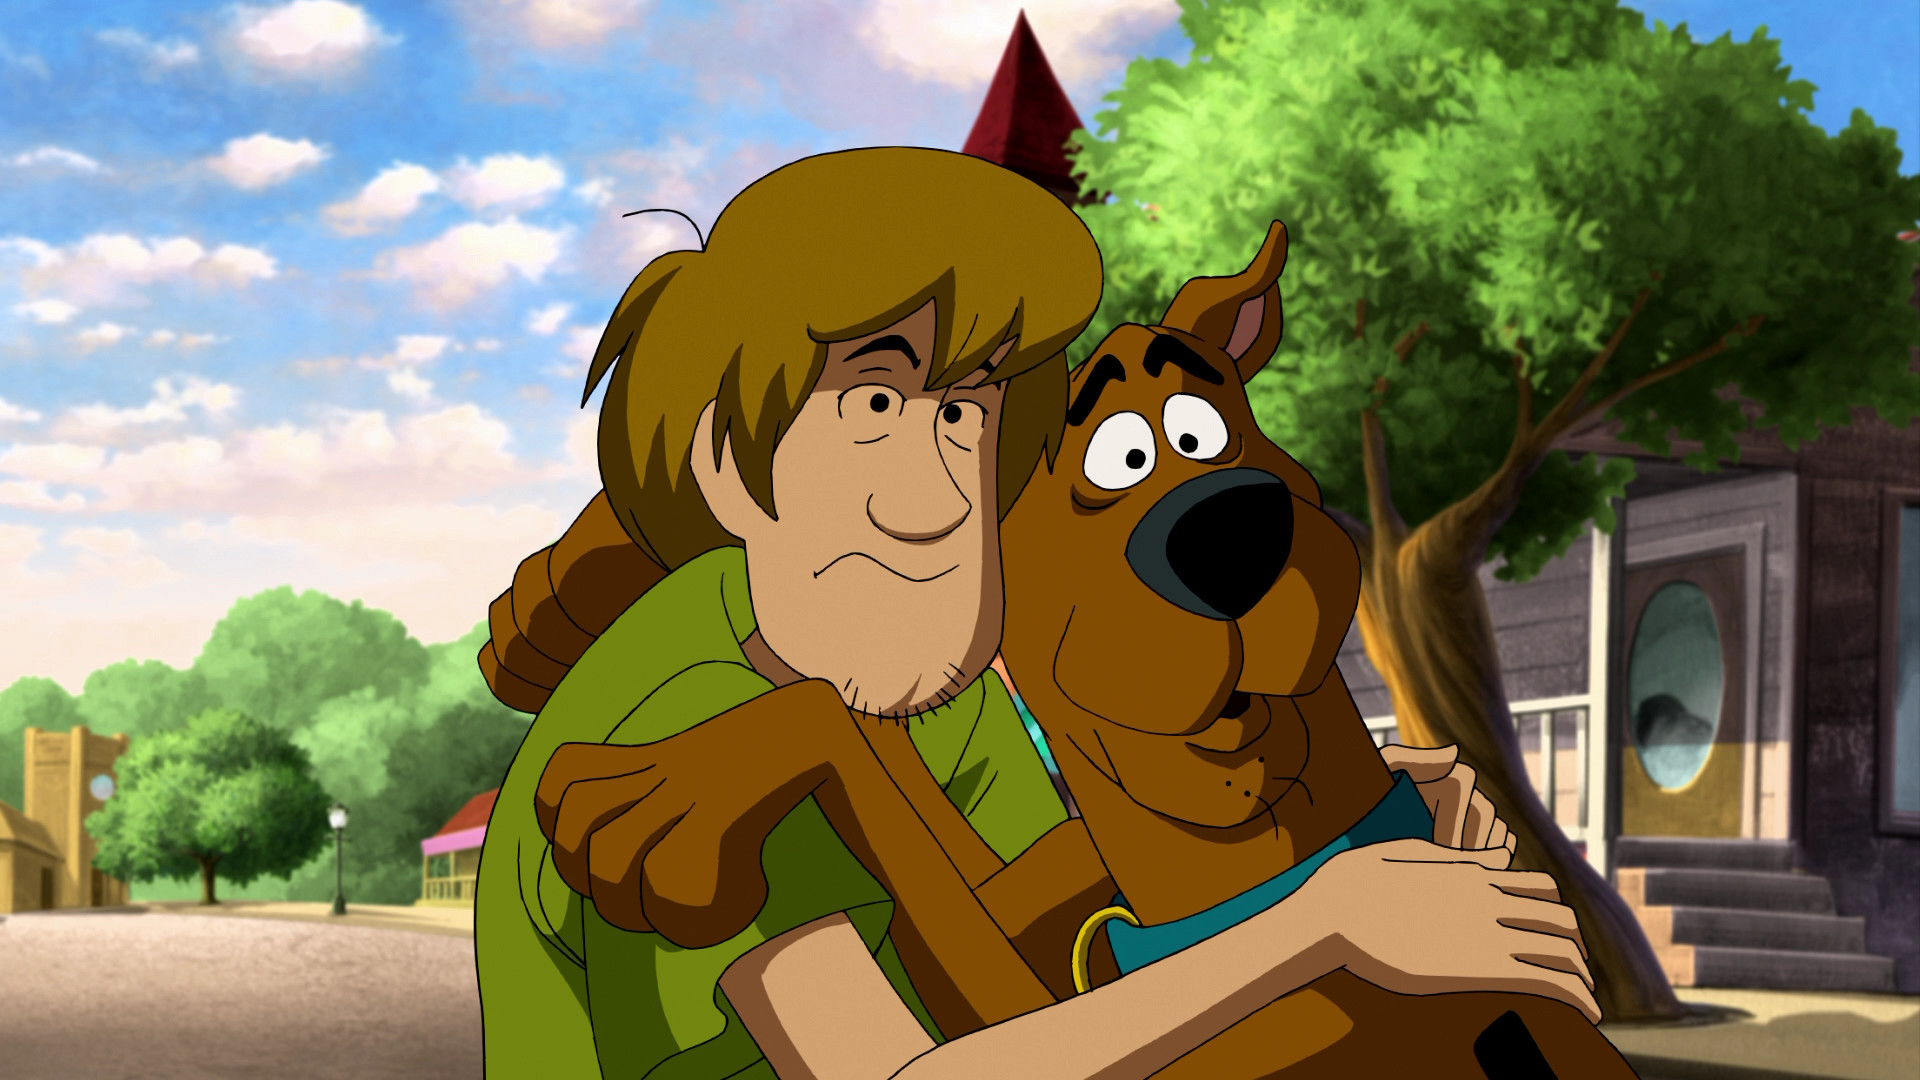 1920x1080  Related Wallpapers from Scooby Doo Wallpaper. Cute Cartoon  Pictures of Cartoon Characters